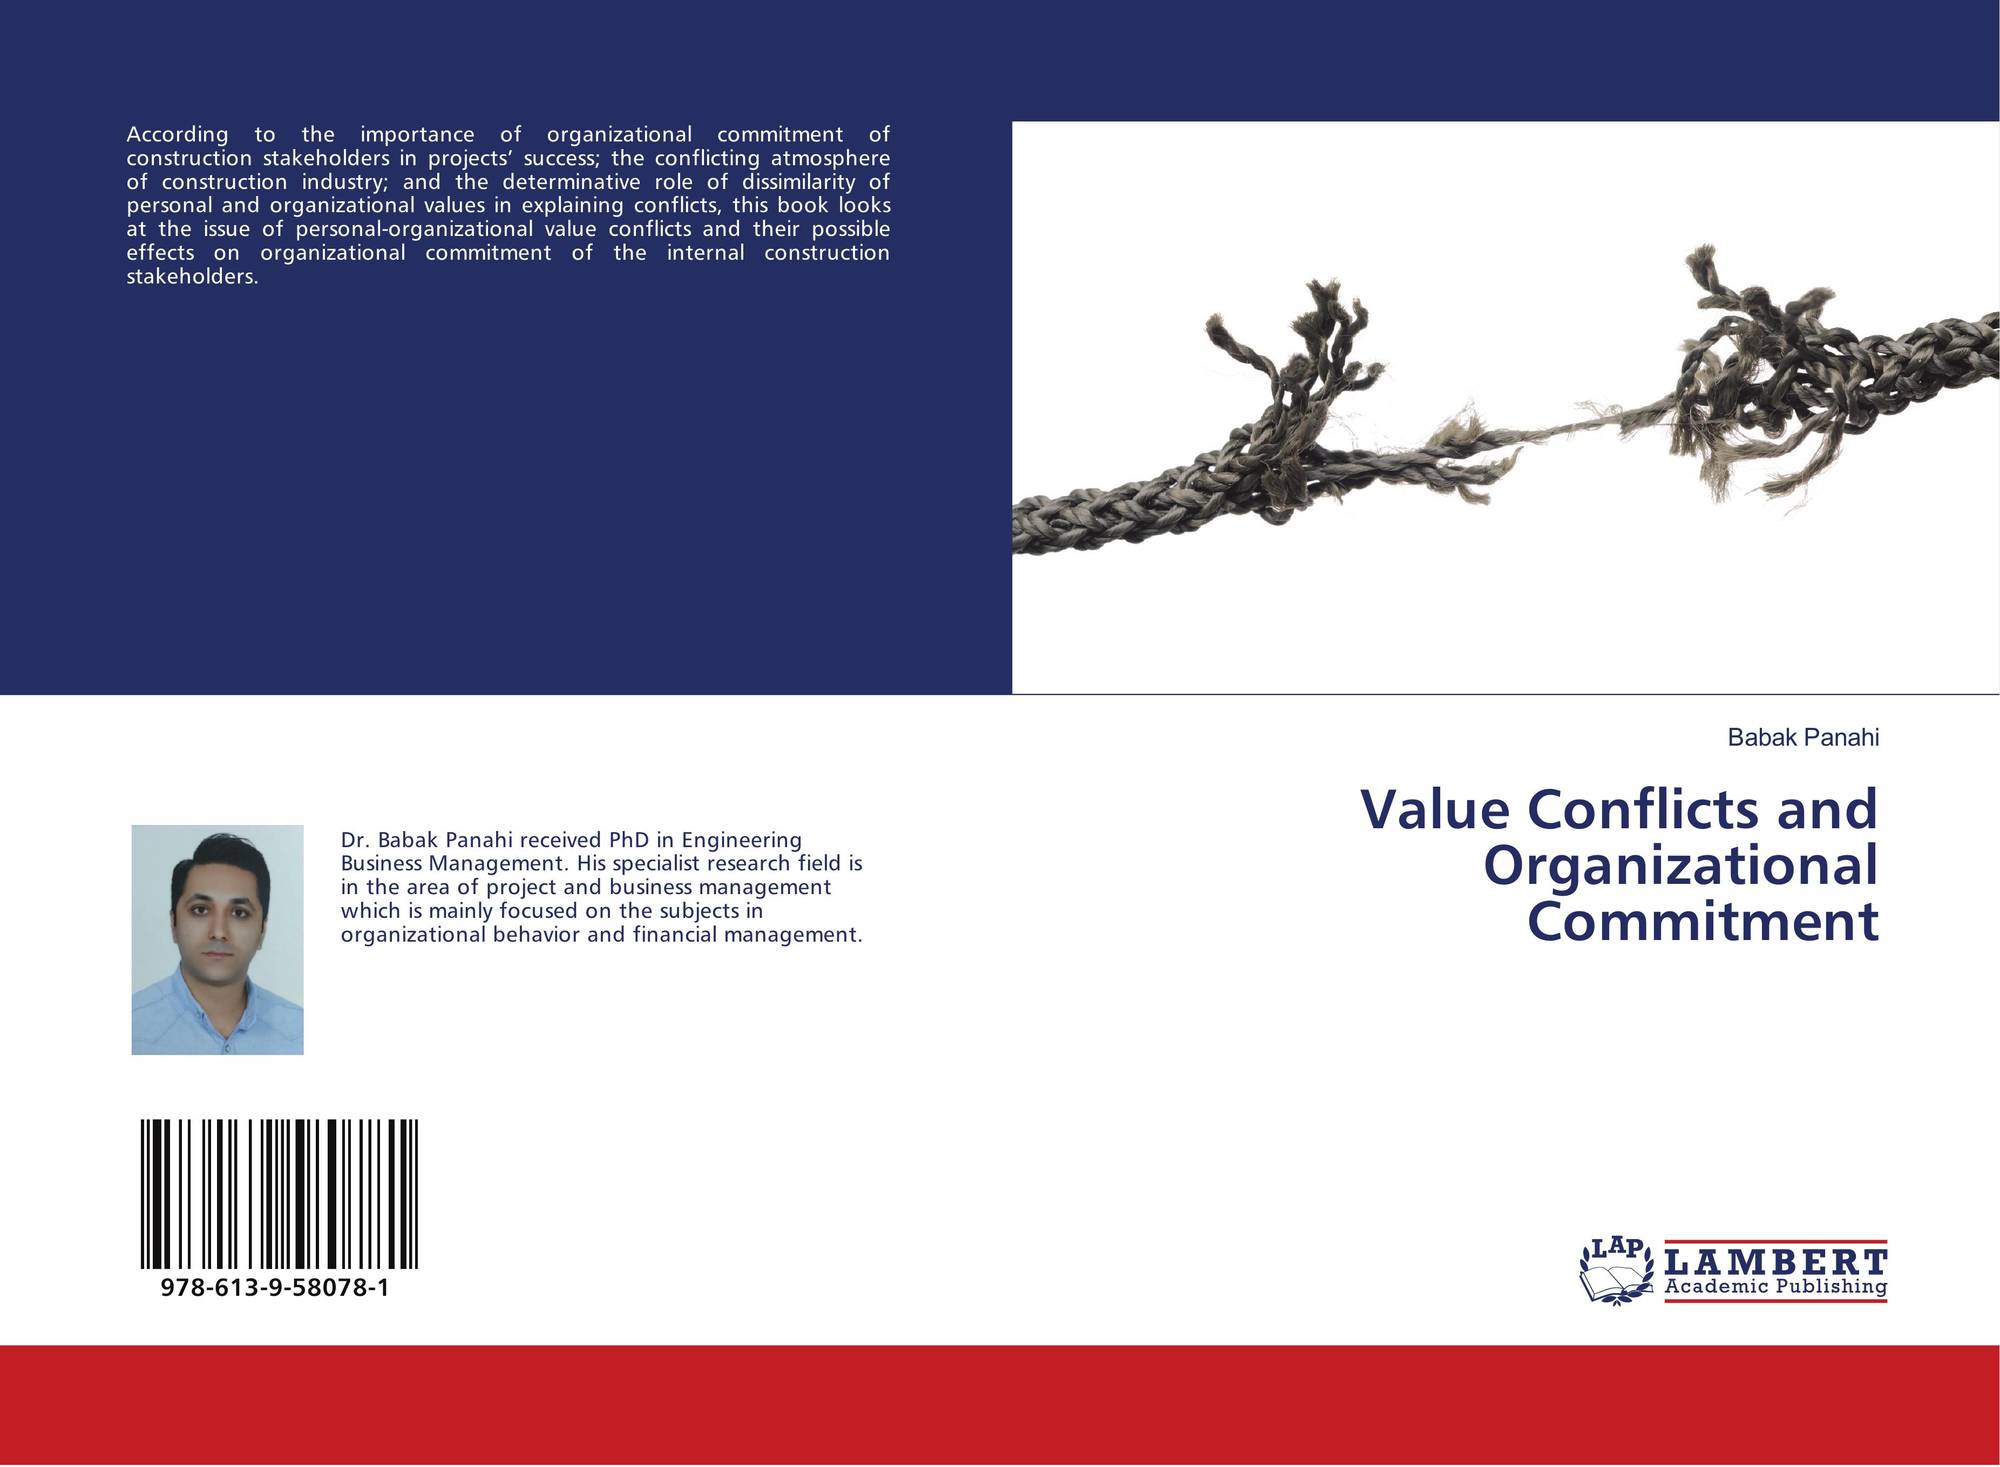 Value Conflicts and Organizational Commitment, 978-613-9-58078-1